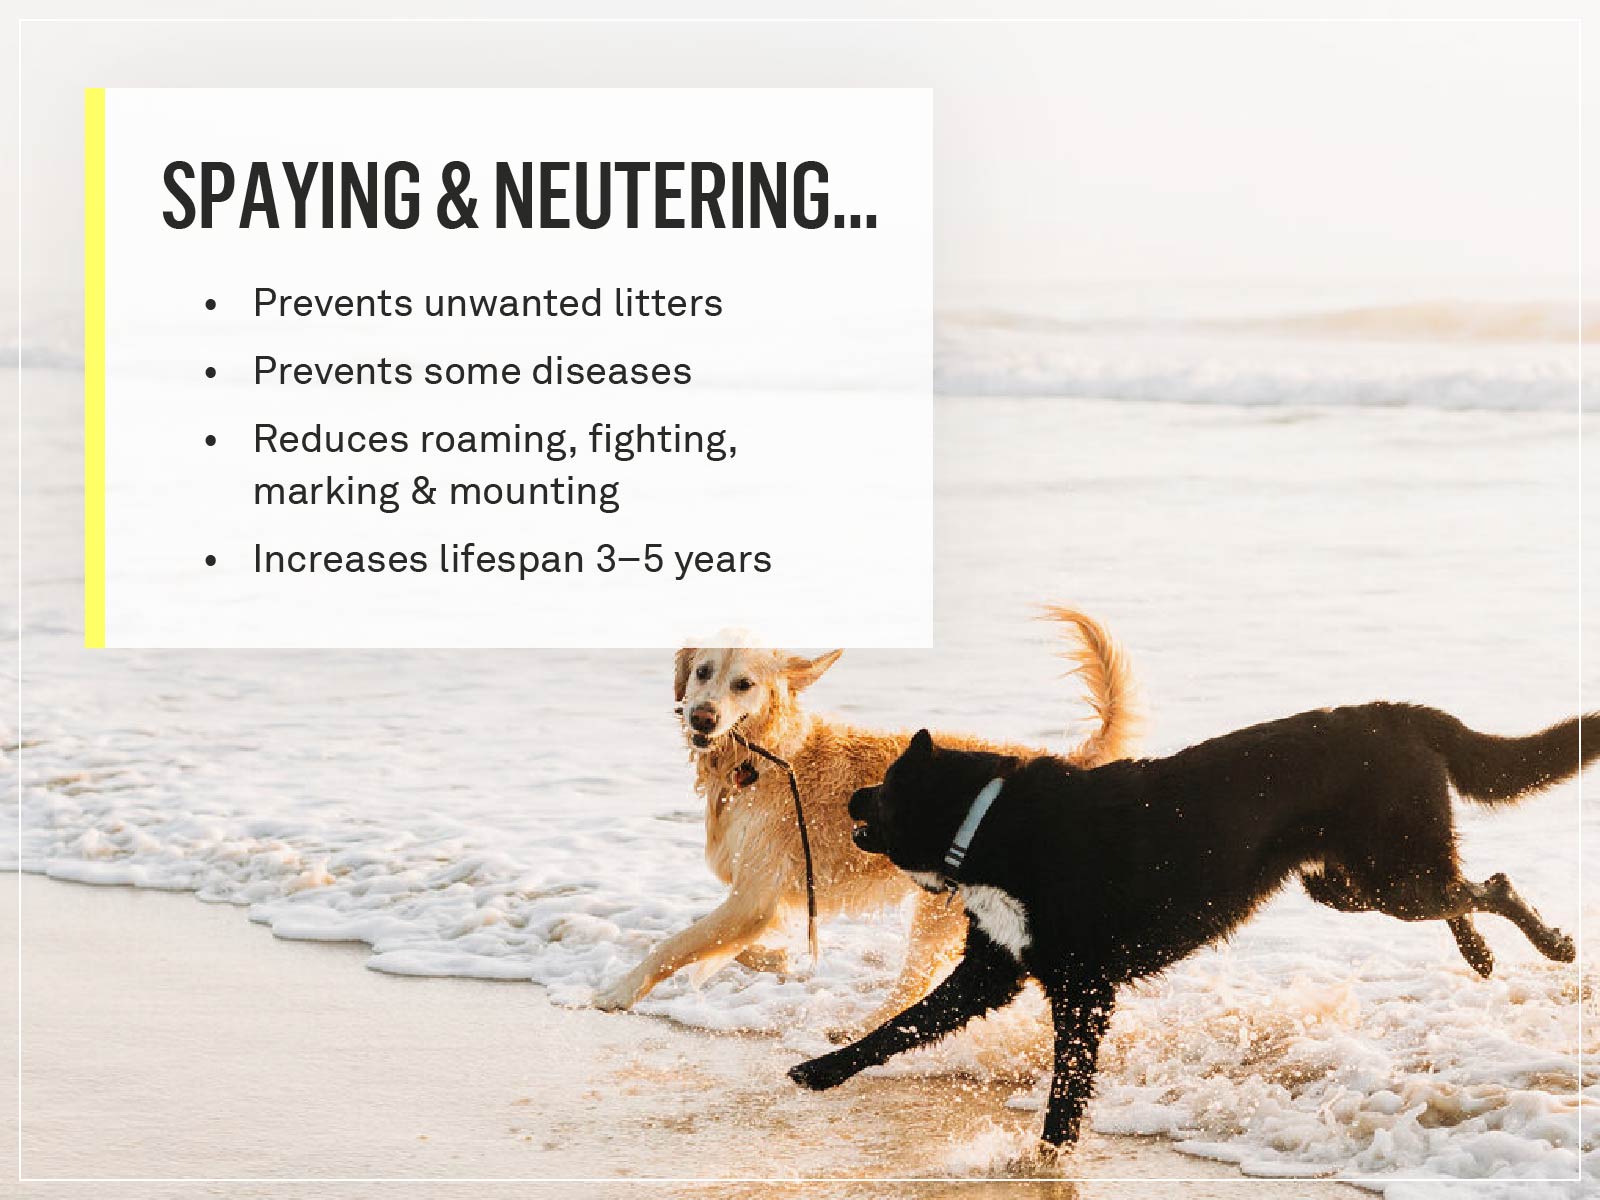 is spaying a dog safe